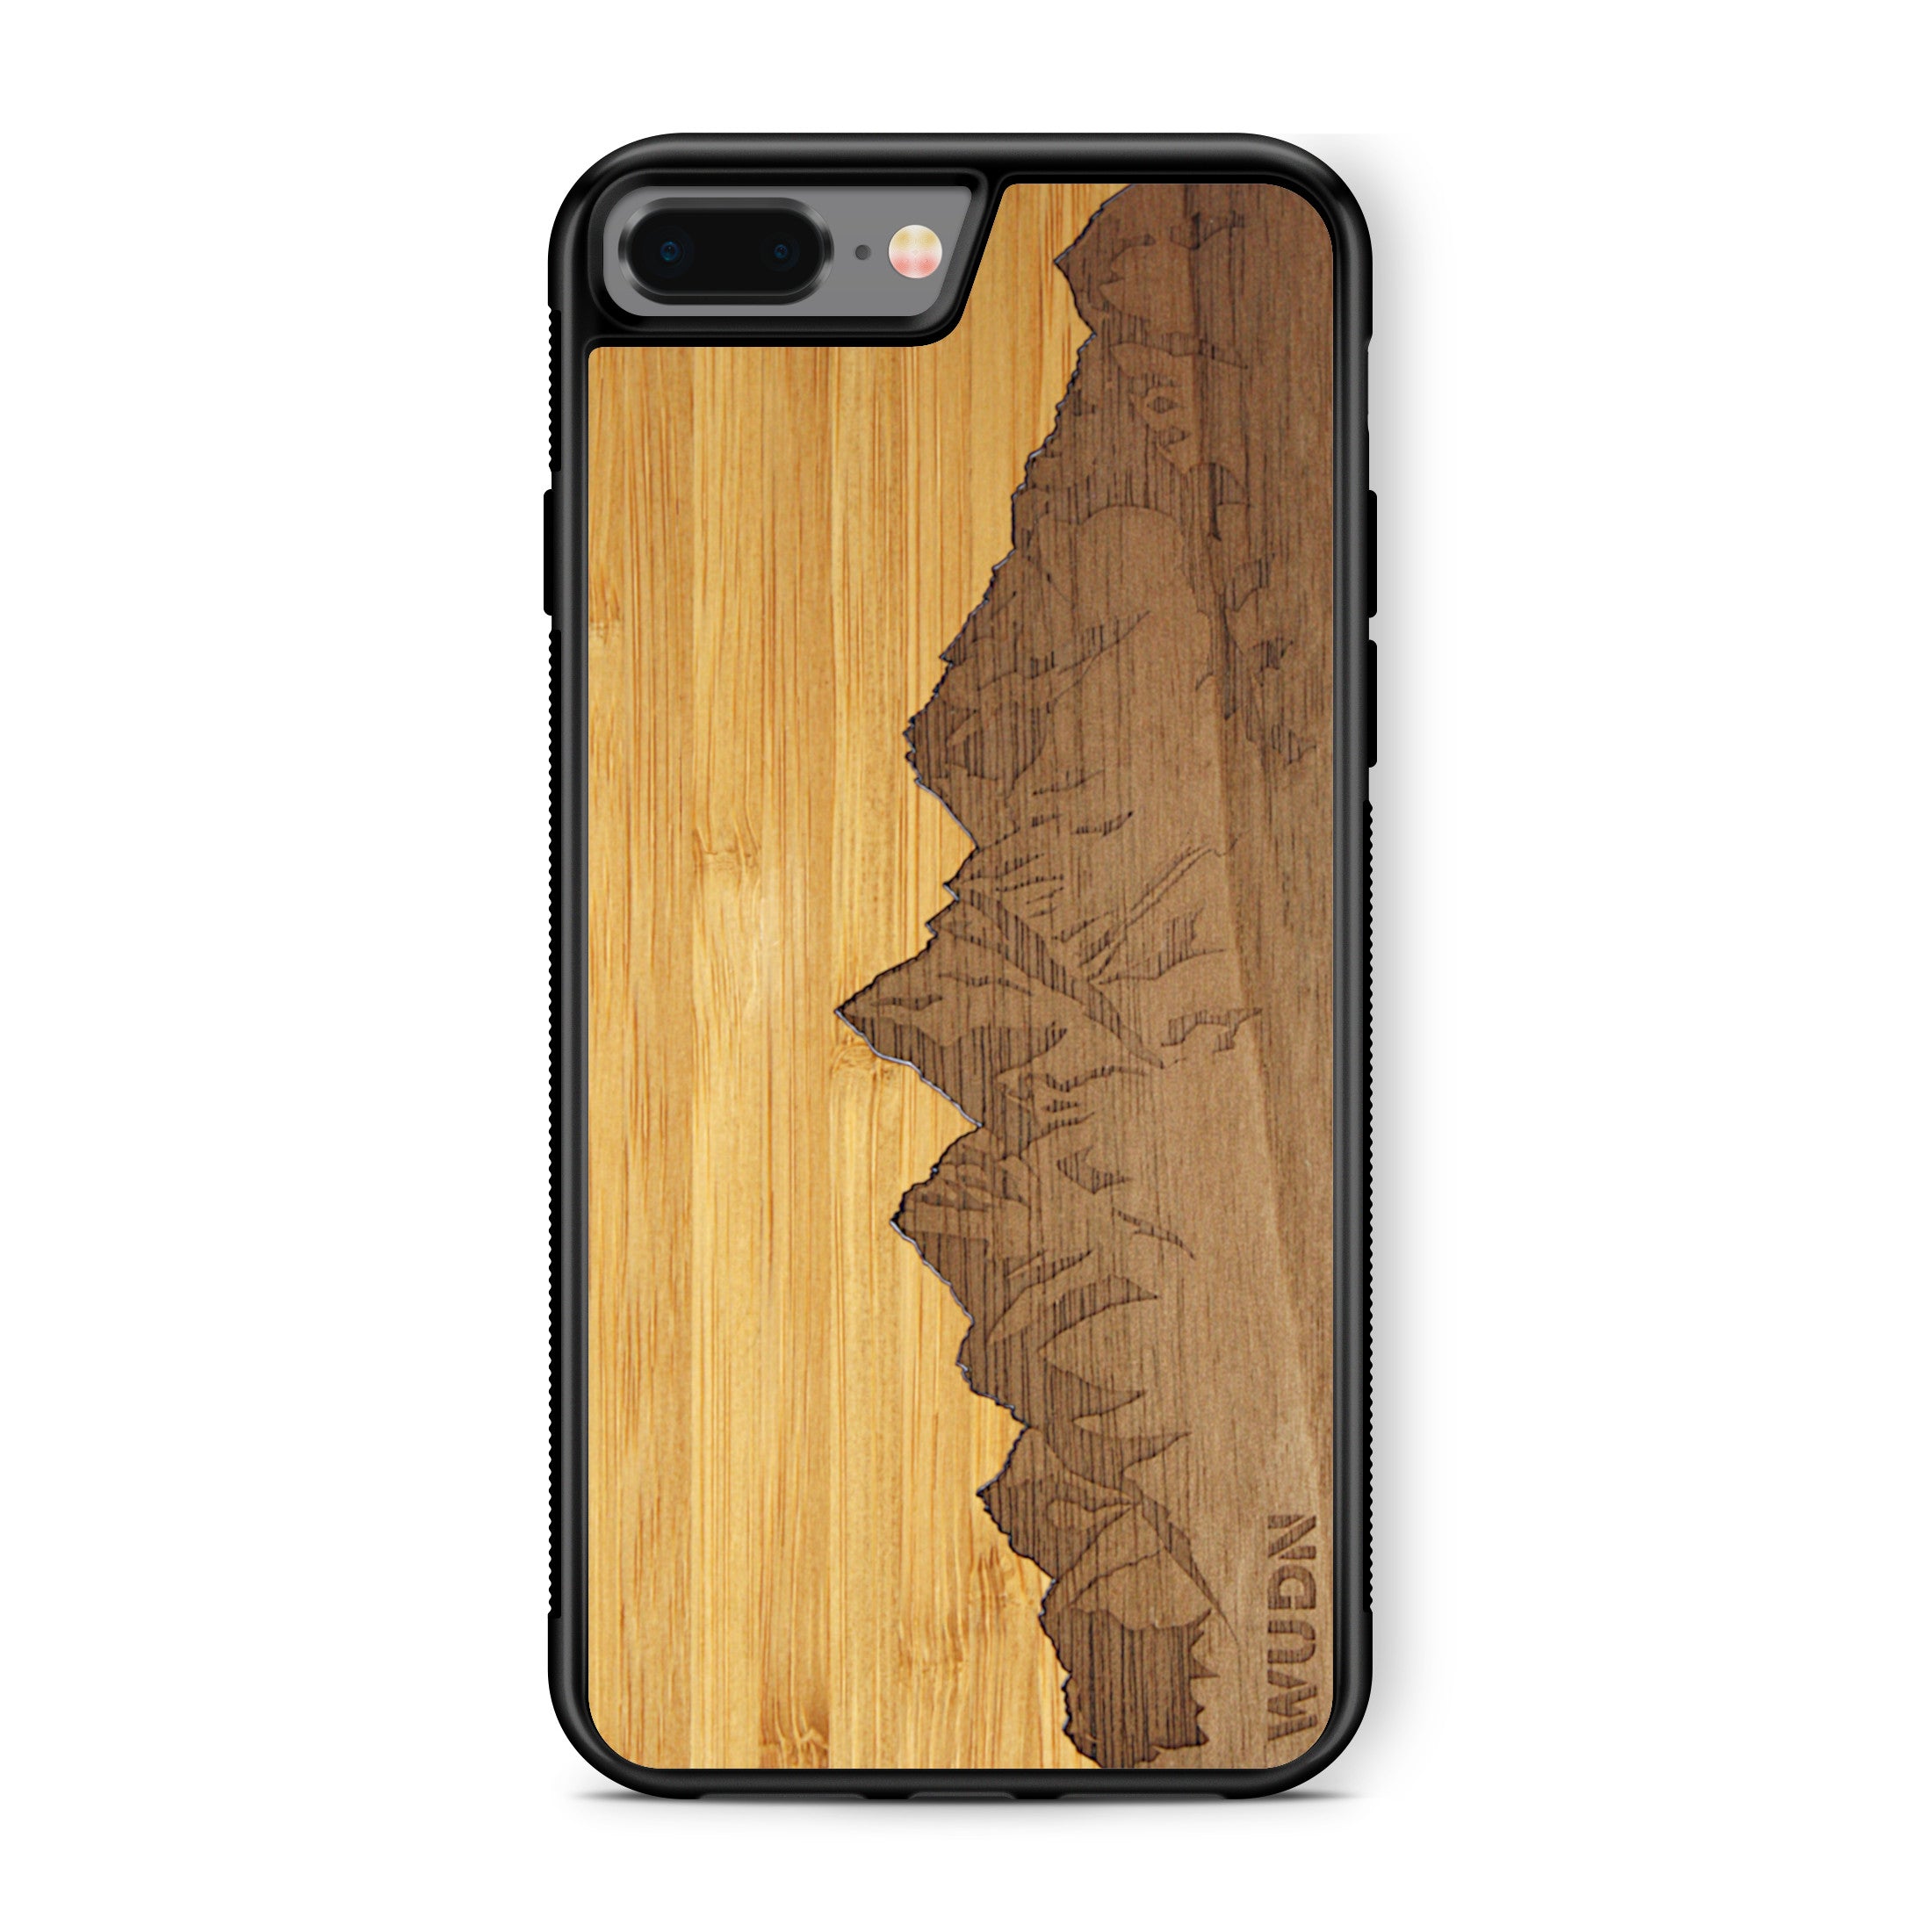 Slim Wooden Phone Case | Sawtooth Mountains Traveler, Cases by WUDN for iPhone 7 Plus / 8 Plus